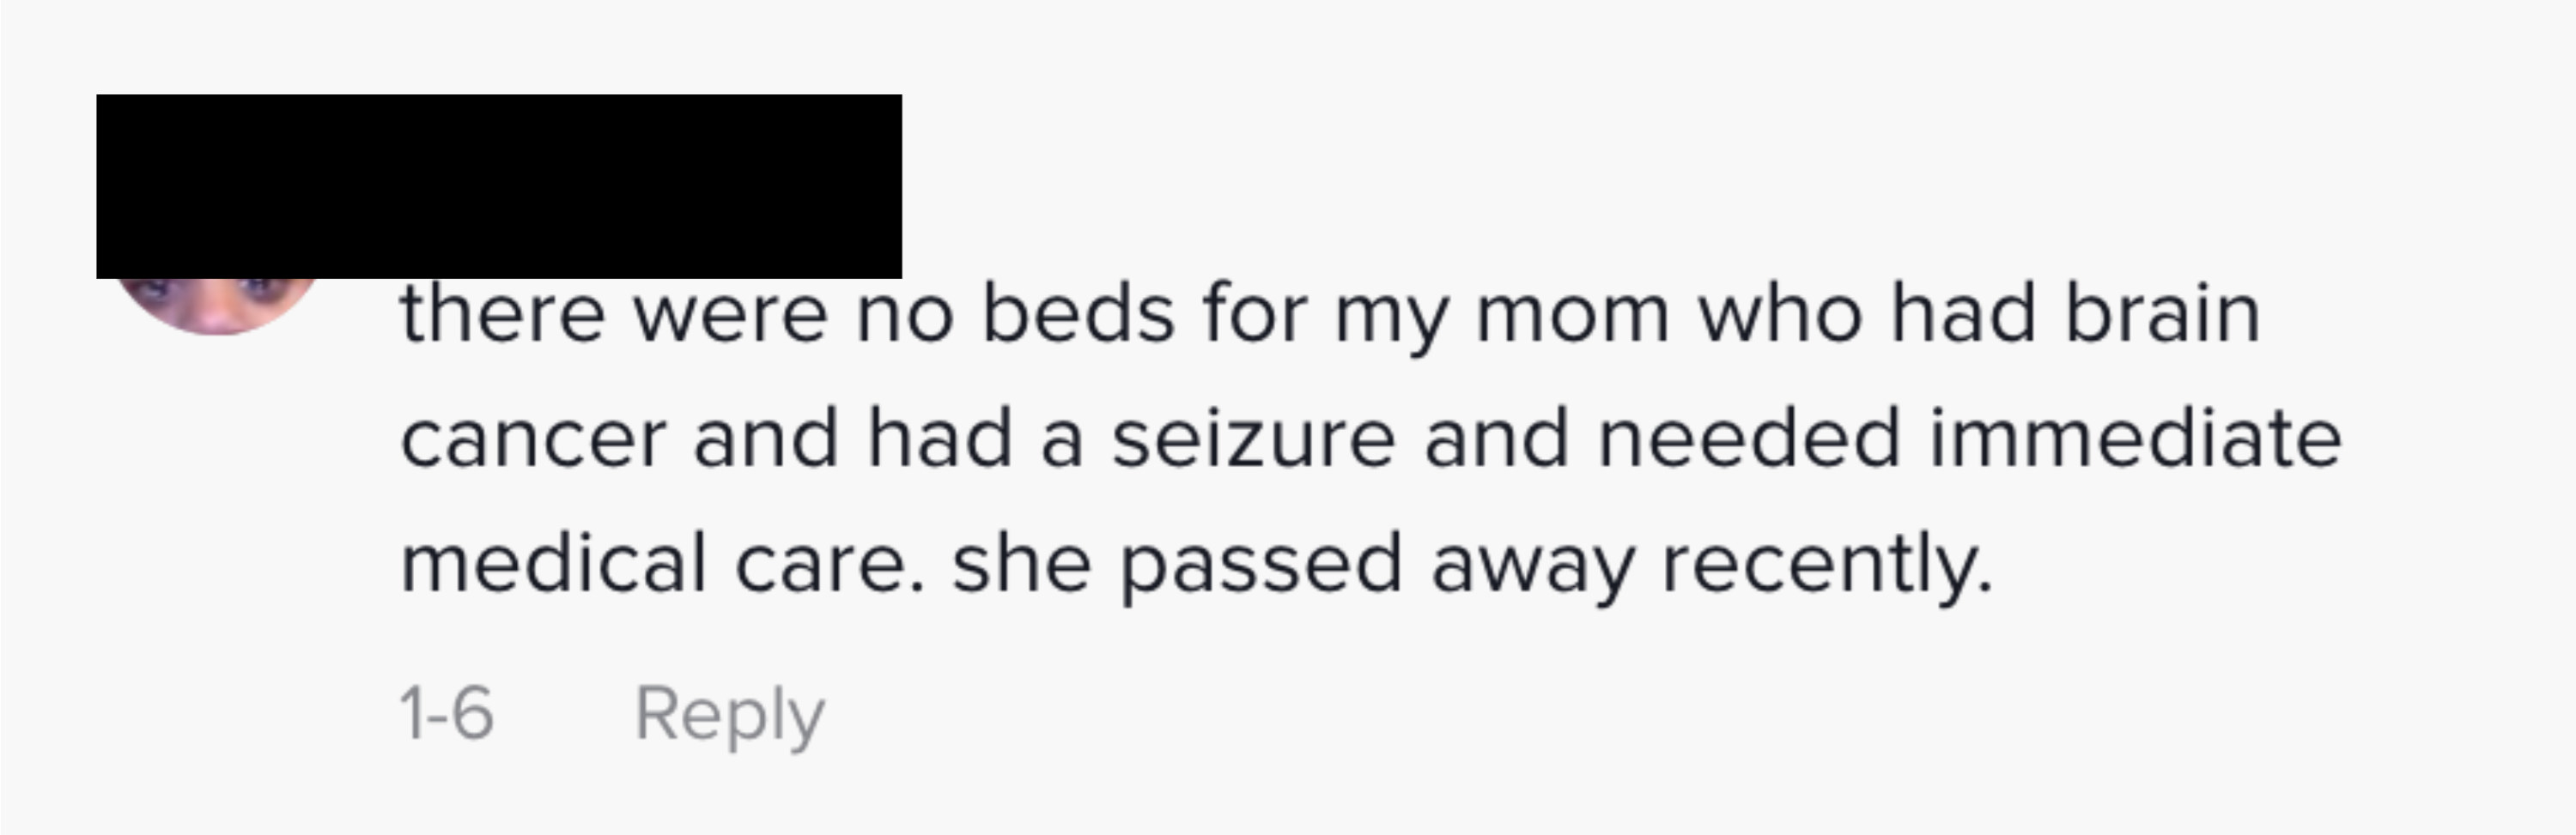 there were no beds for my mom who had brain cancer and had a seizure and needed immediate medical care. she passed away recently